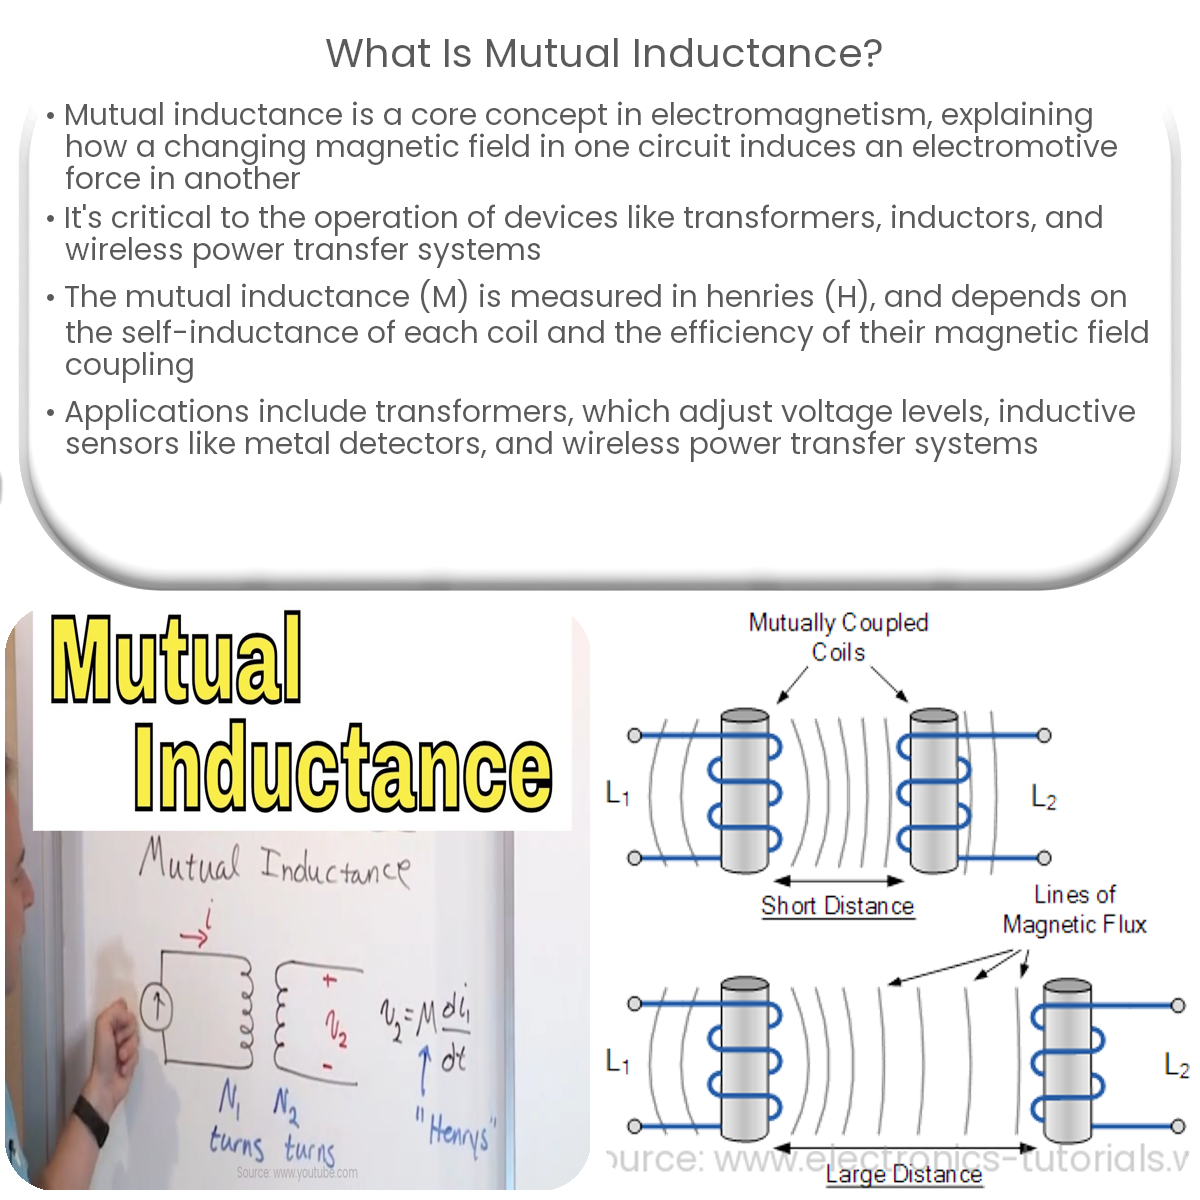 What is mutual inductance?